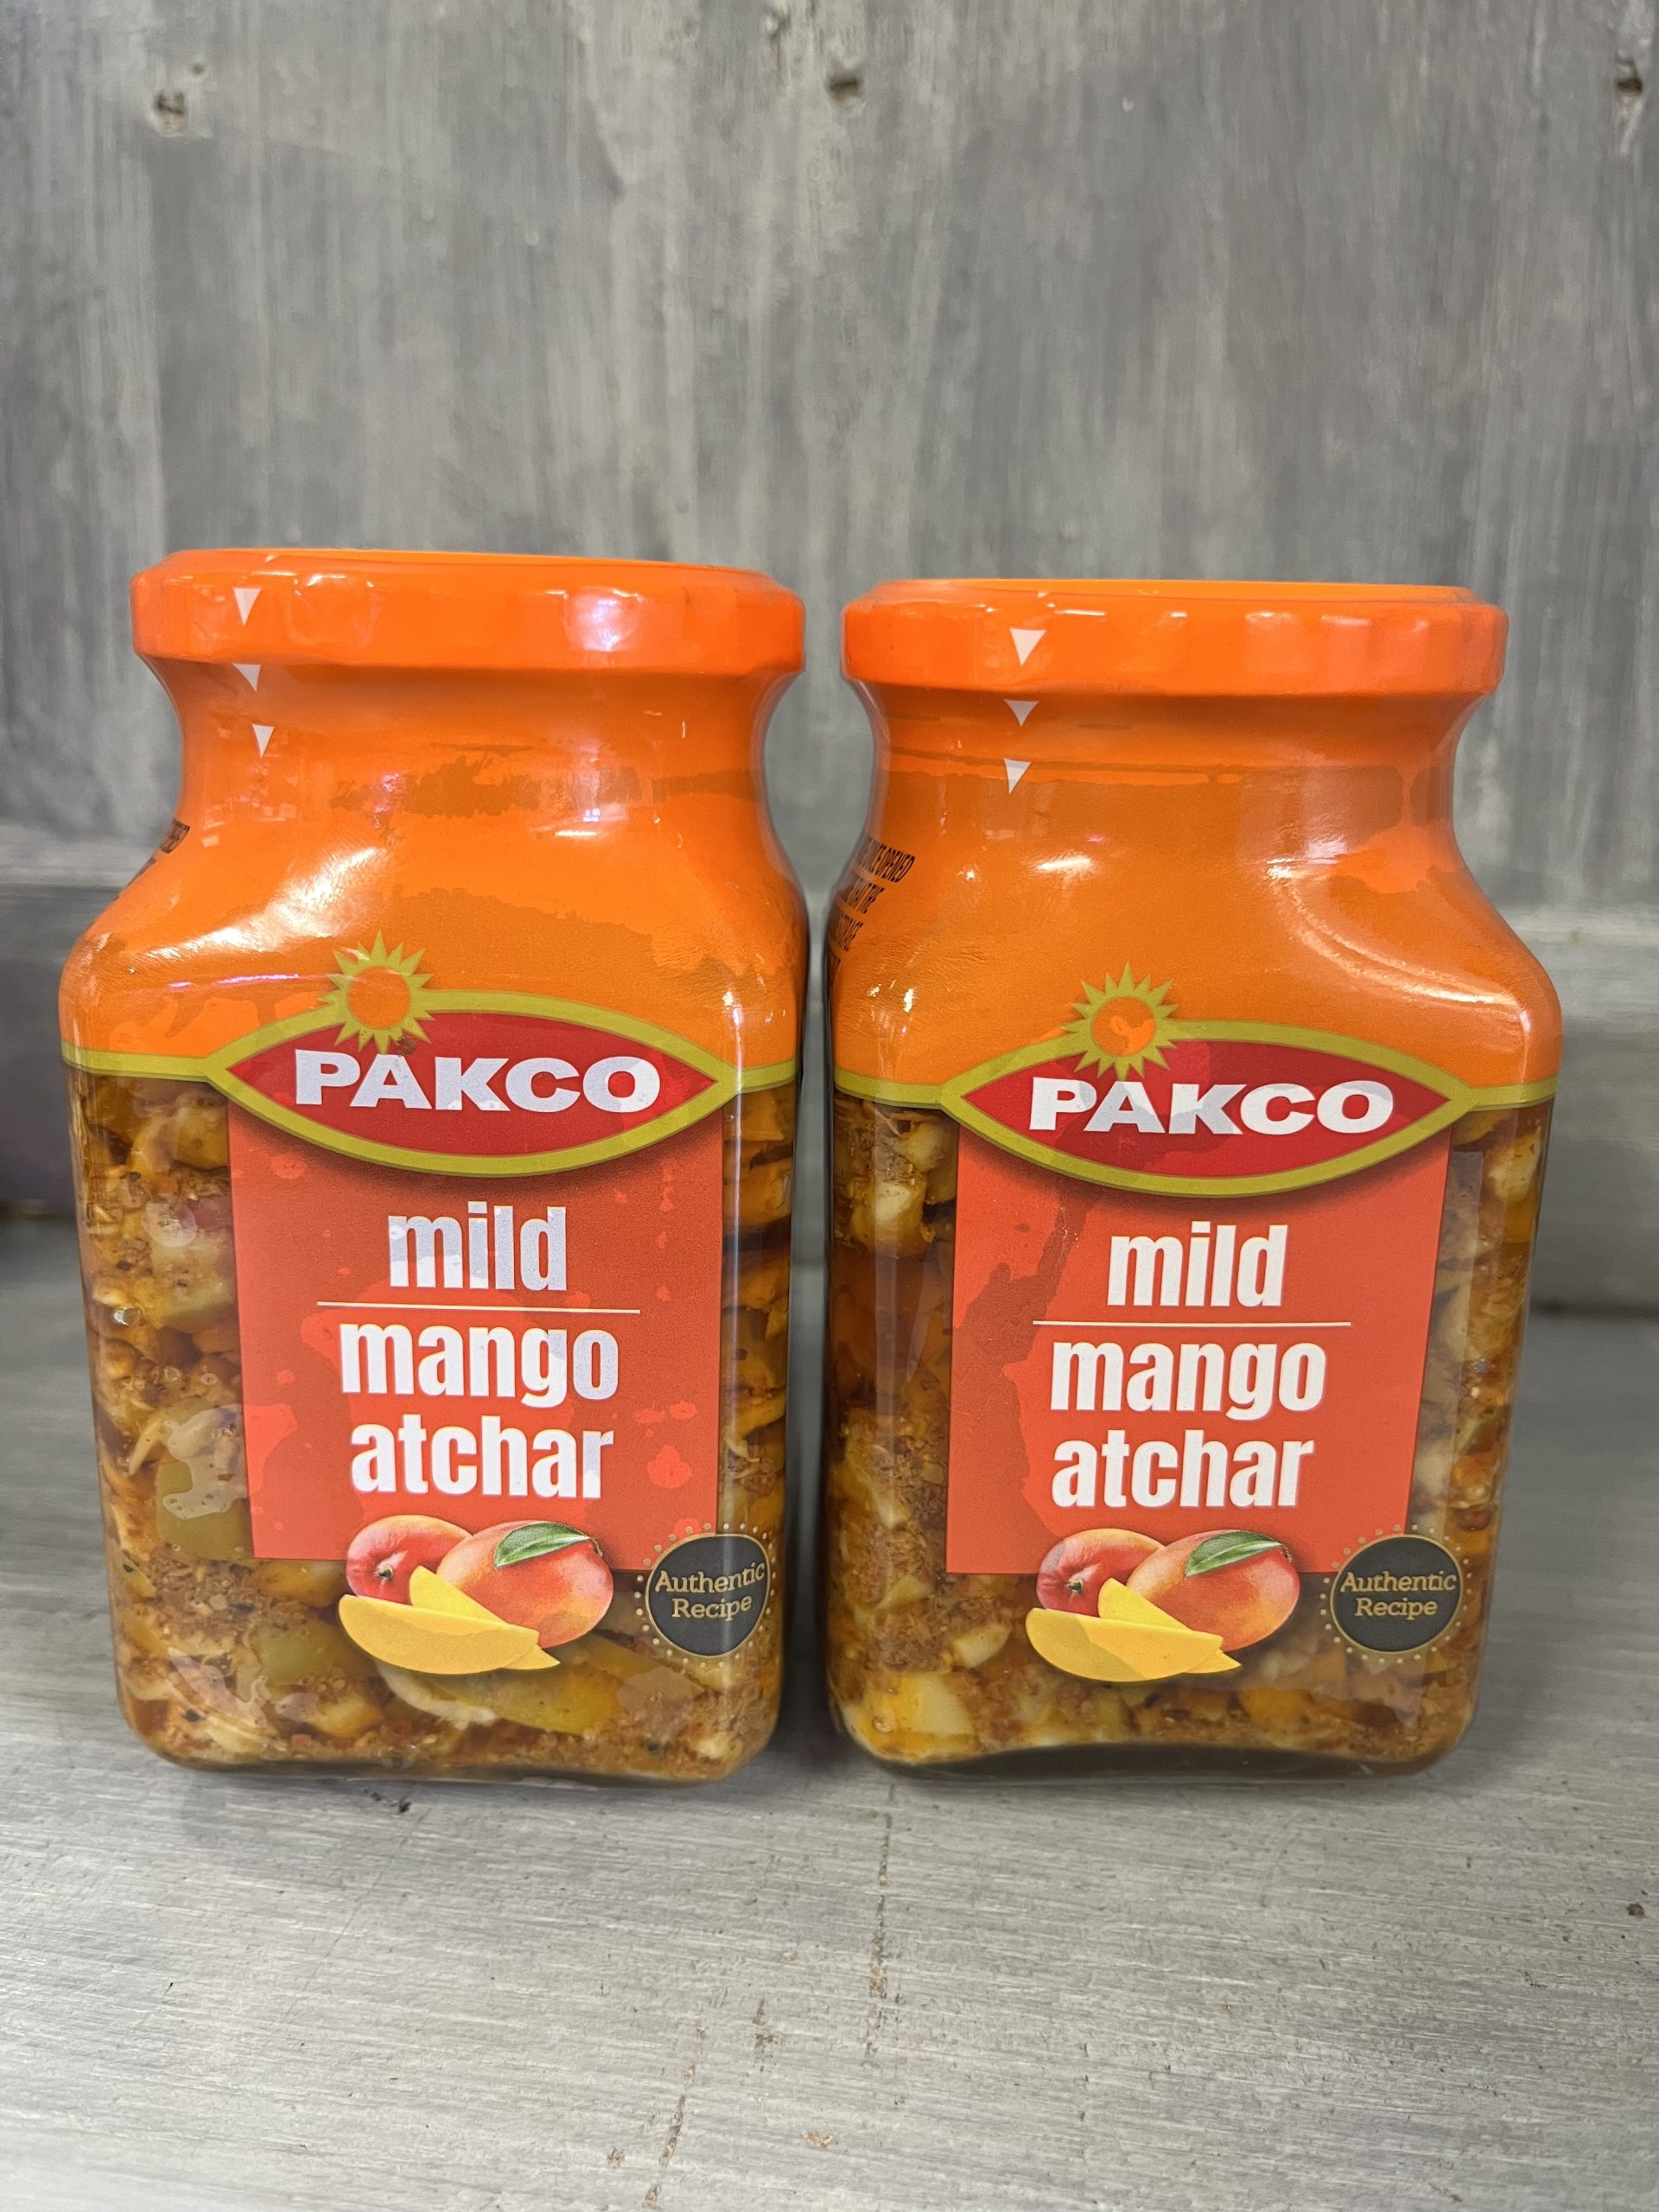 Mild Mango Atchar - Authentic South African condiment with ripe mangoes and traditional spices